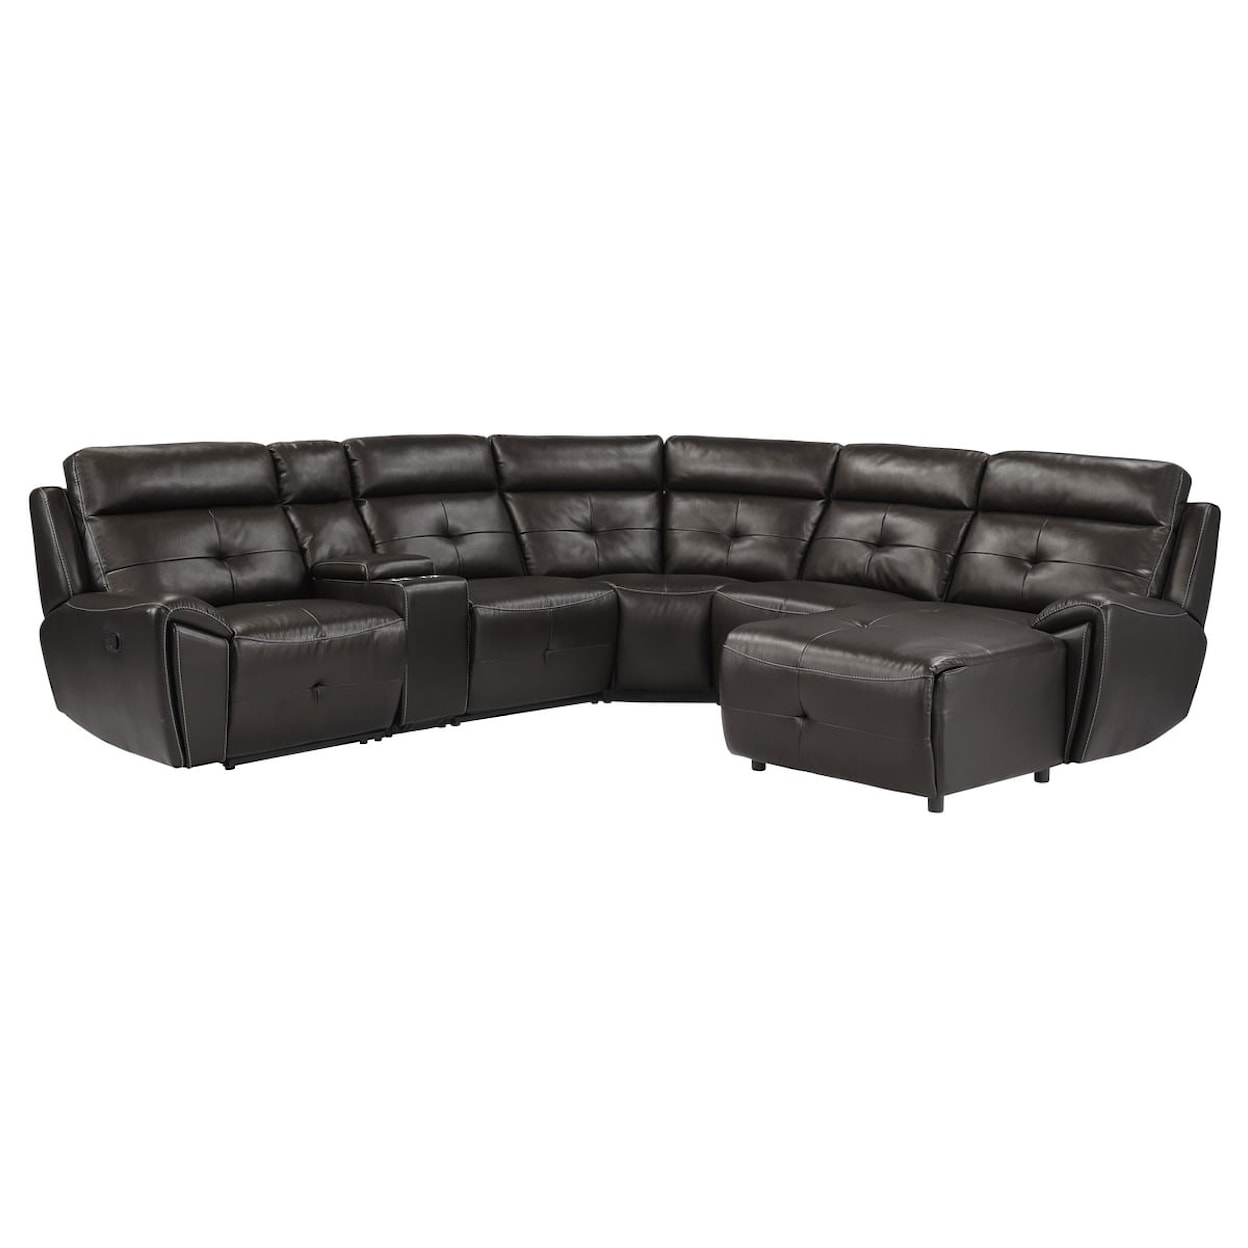 Homelegance Avenue 6-Piece Reclining Sectional